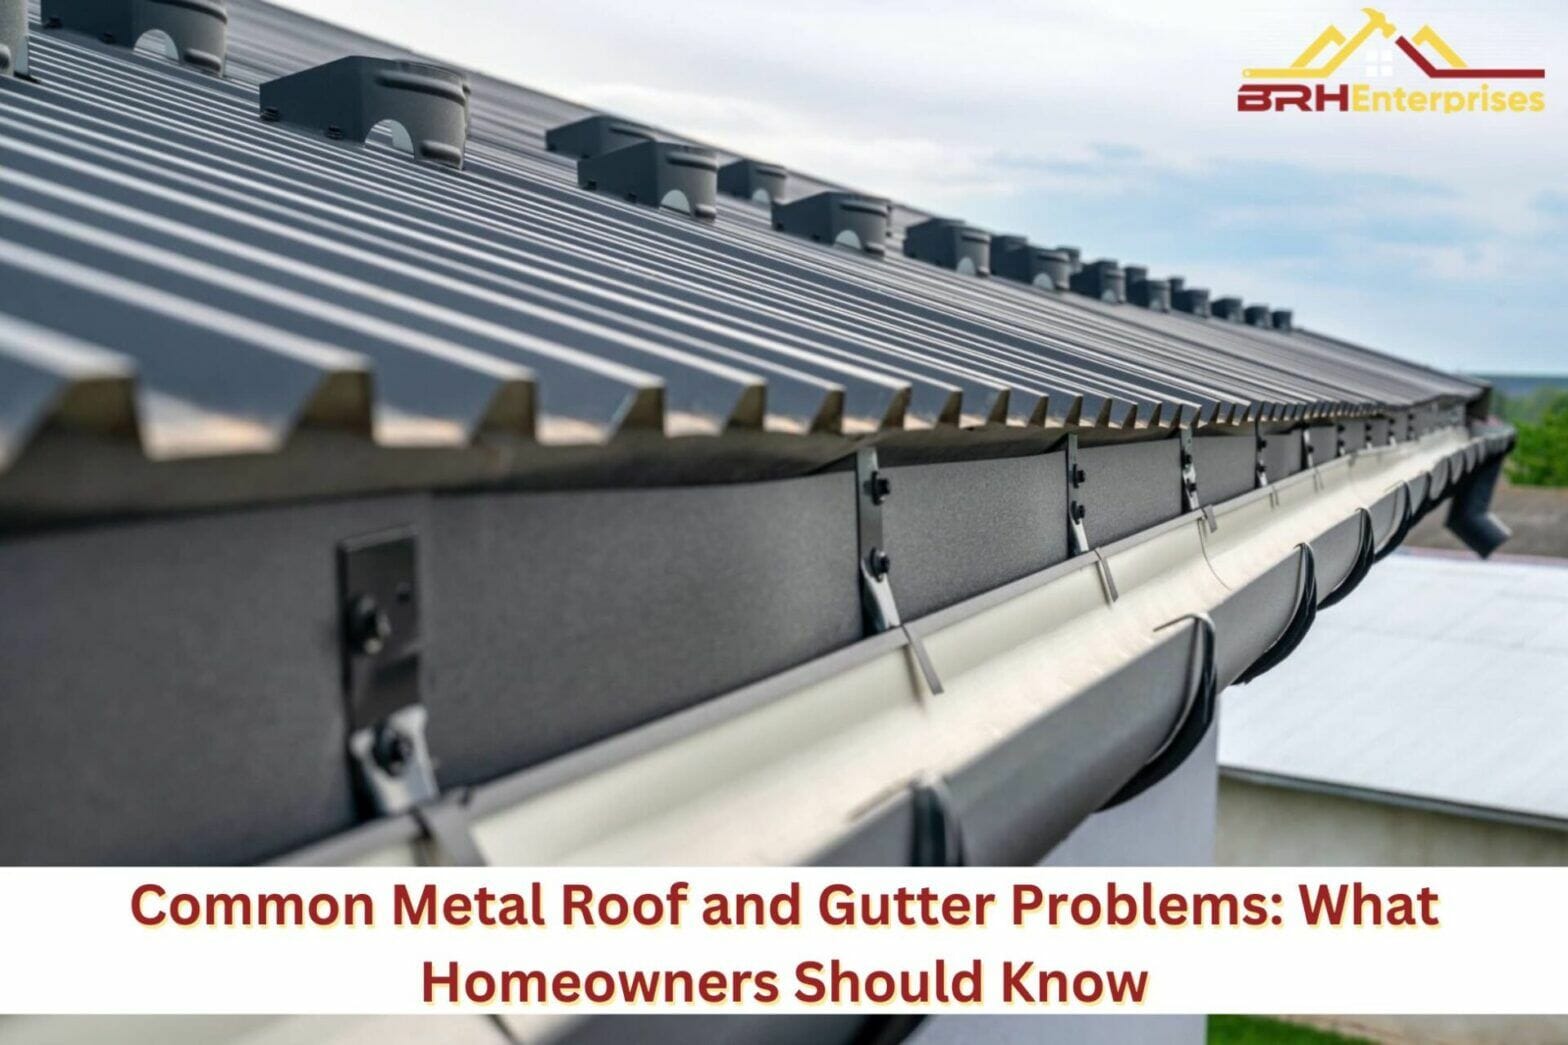 Common Metal Roof and Gutter Problems: What Homeowners Should Know